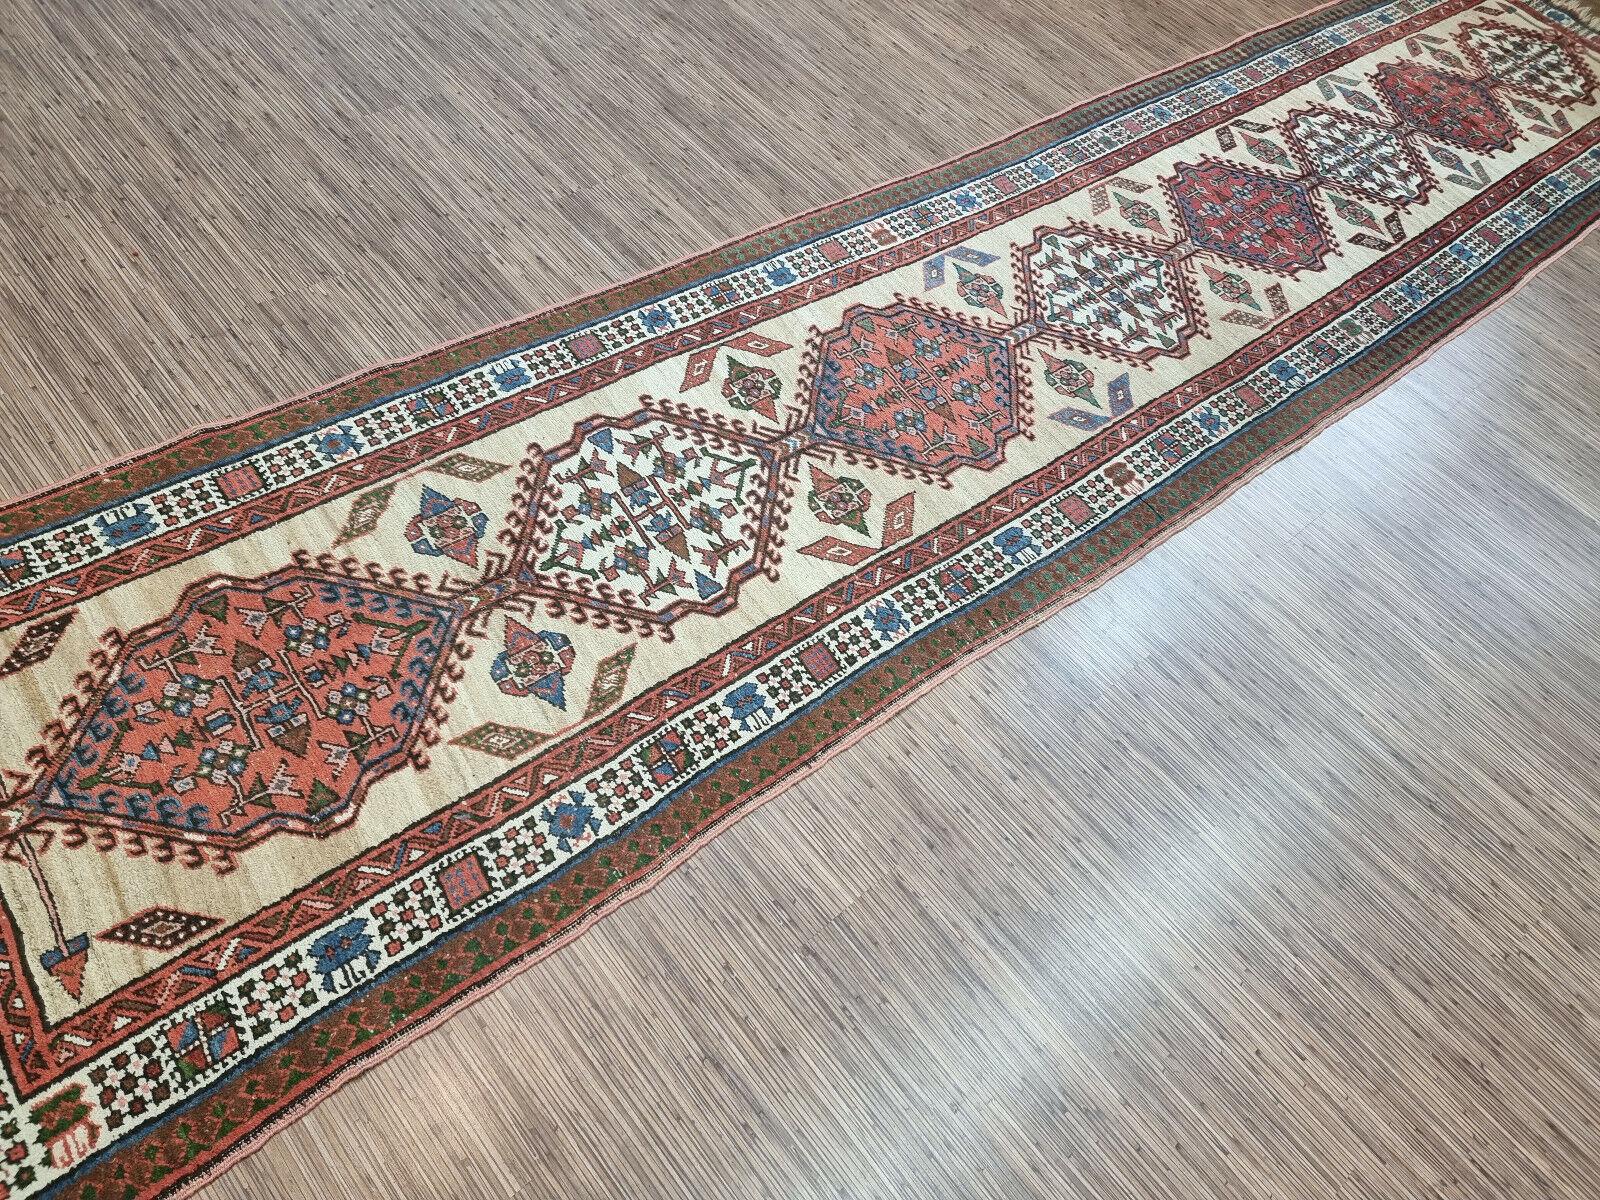 Handmade Antique Persian Style Serab Runner Rug 3.2' x 14.9', 1900s - 1D101 In Good Condition For Sale In Bordeaux, FR